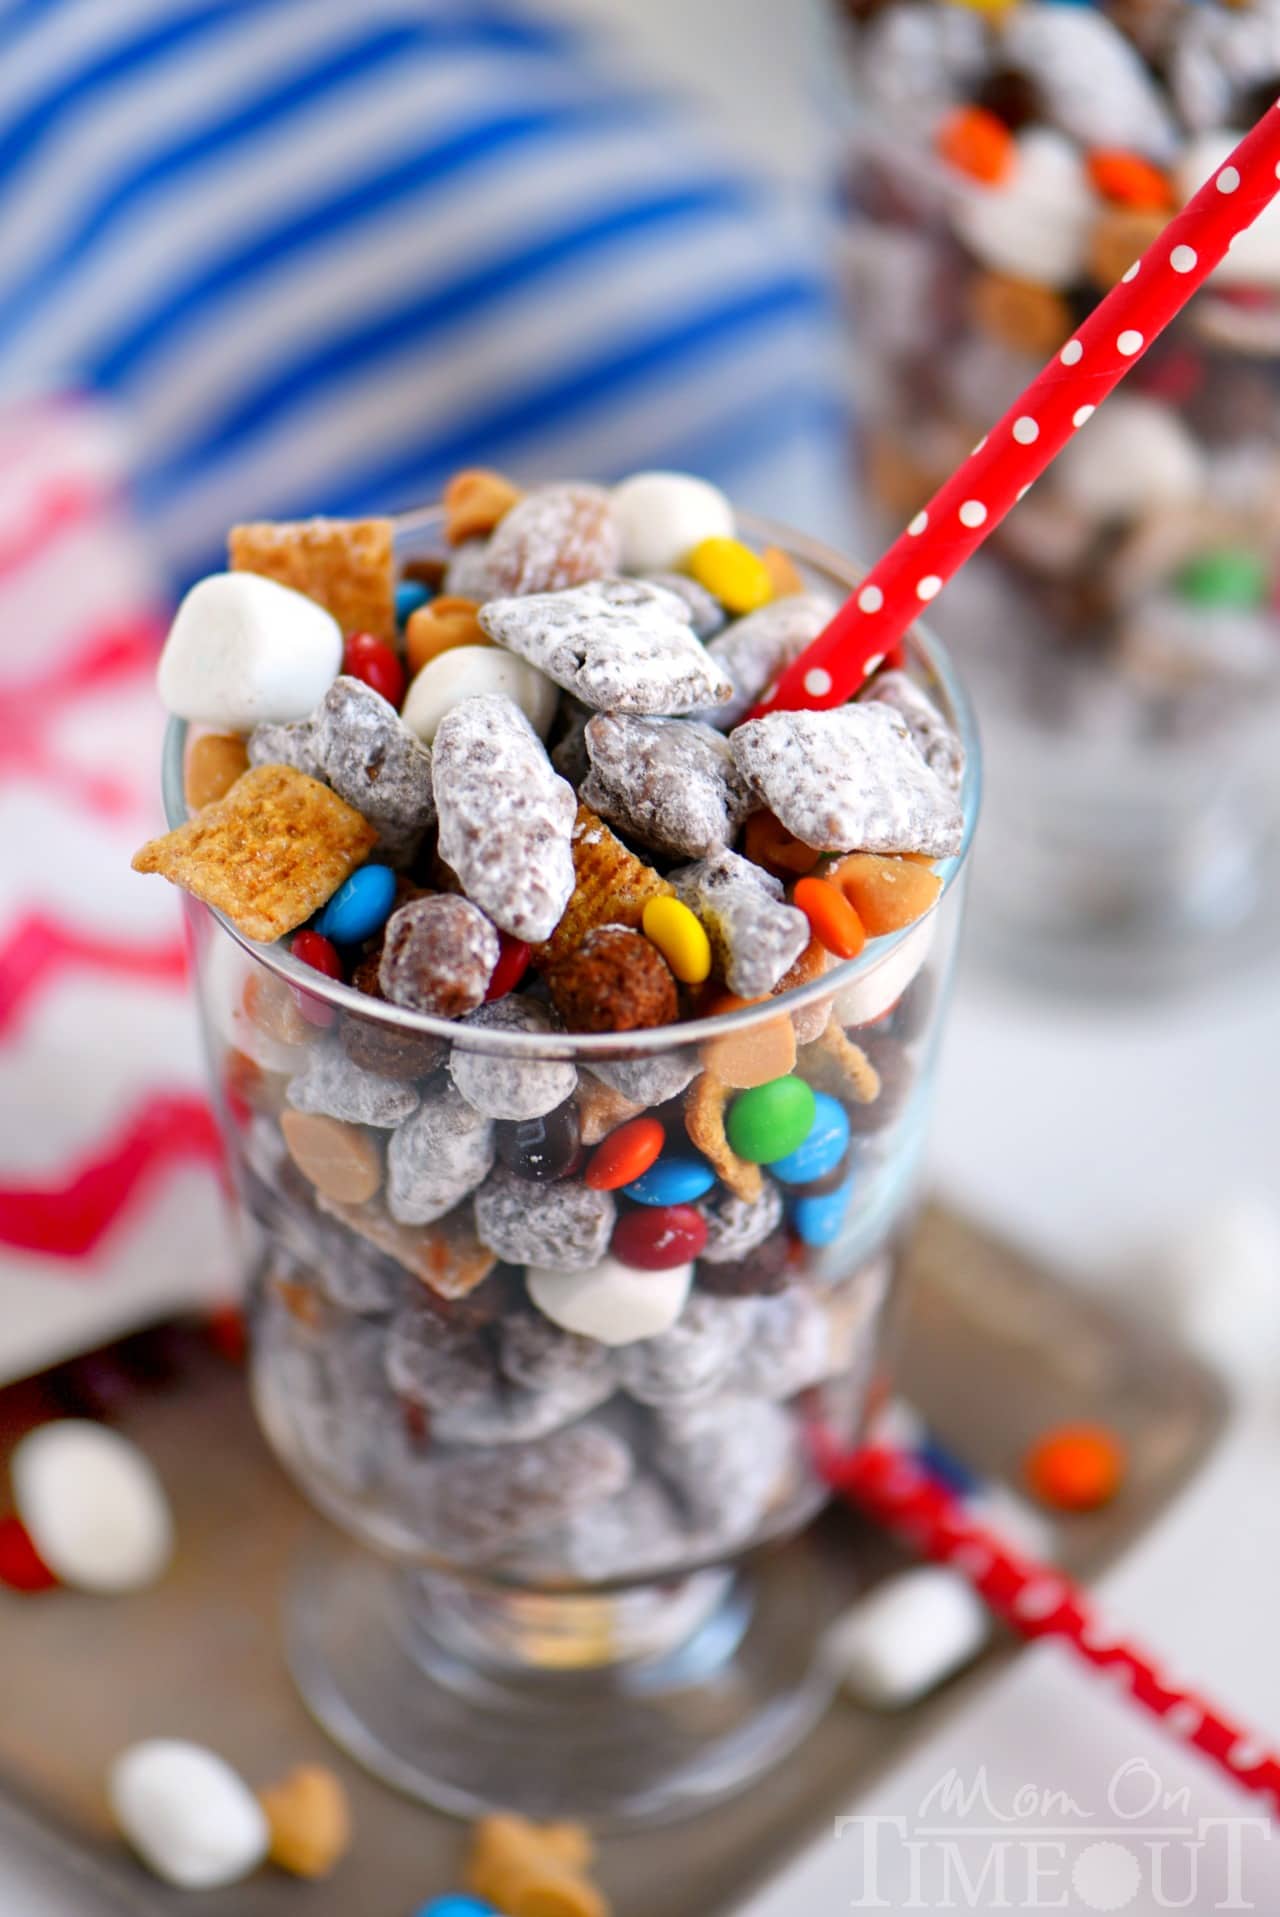 These Monster S'mores Muddy Buddies are the ultimate snack mix! Filled with all sorts of goodies like roasted almonds, peanut butter, and marshmallows - this sweet treat is hard to resist!